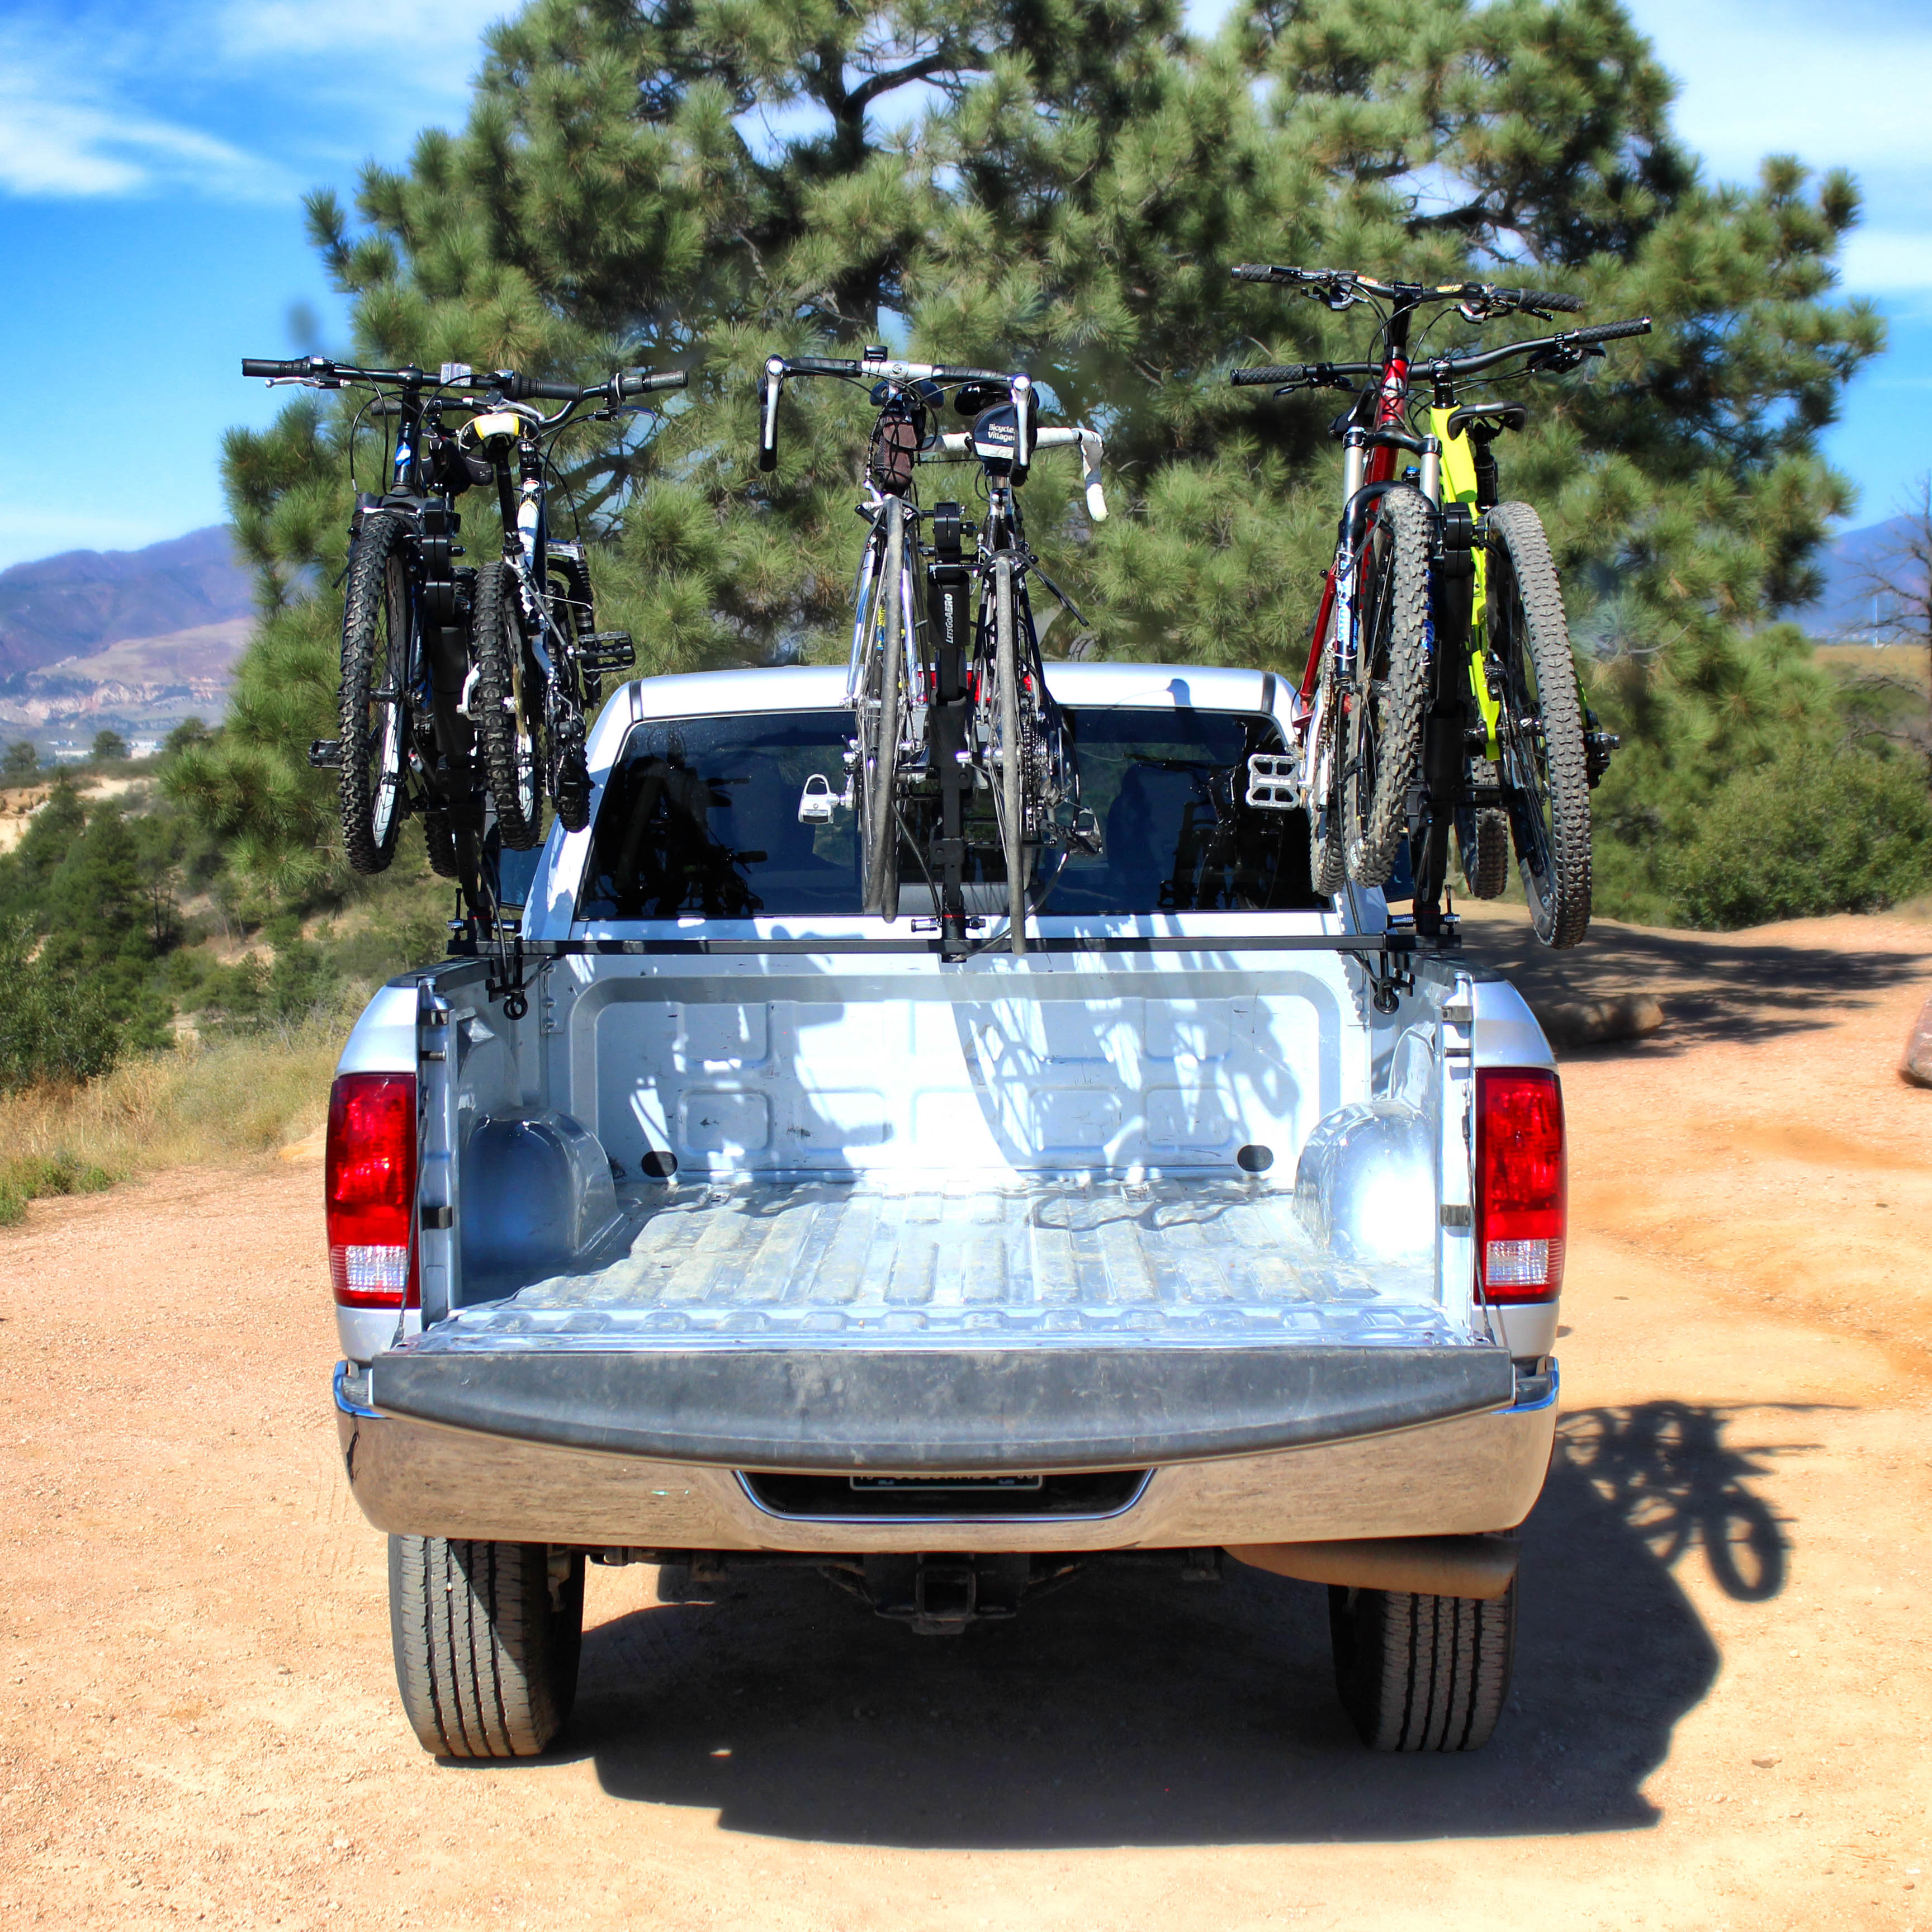 Press Release: Let’s Go Aero Reveals New Bicycle Carrier